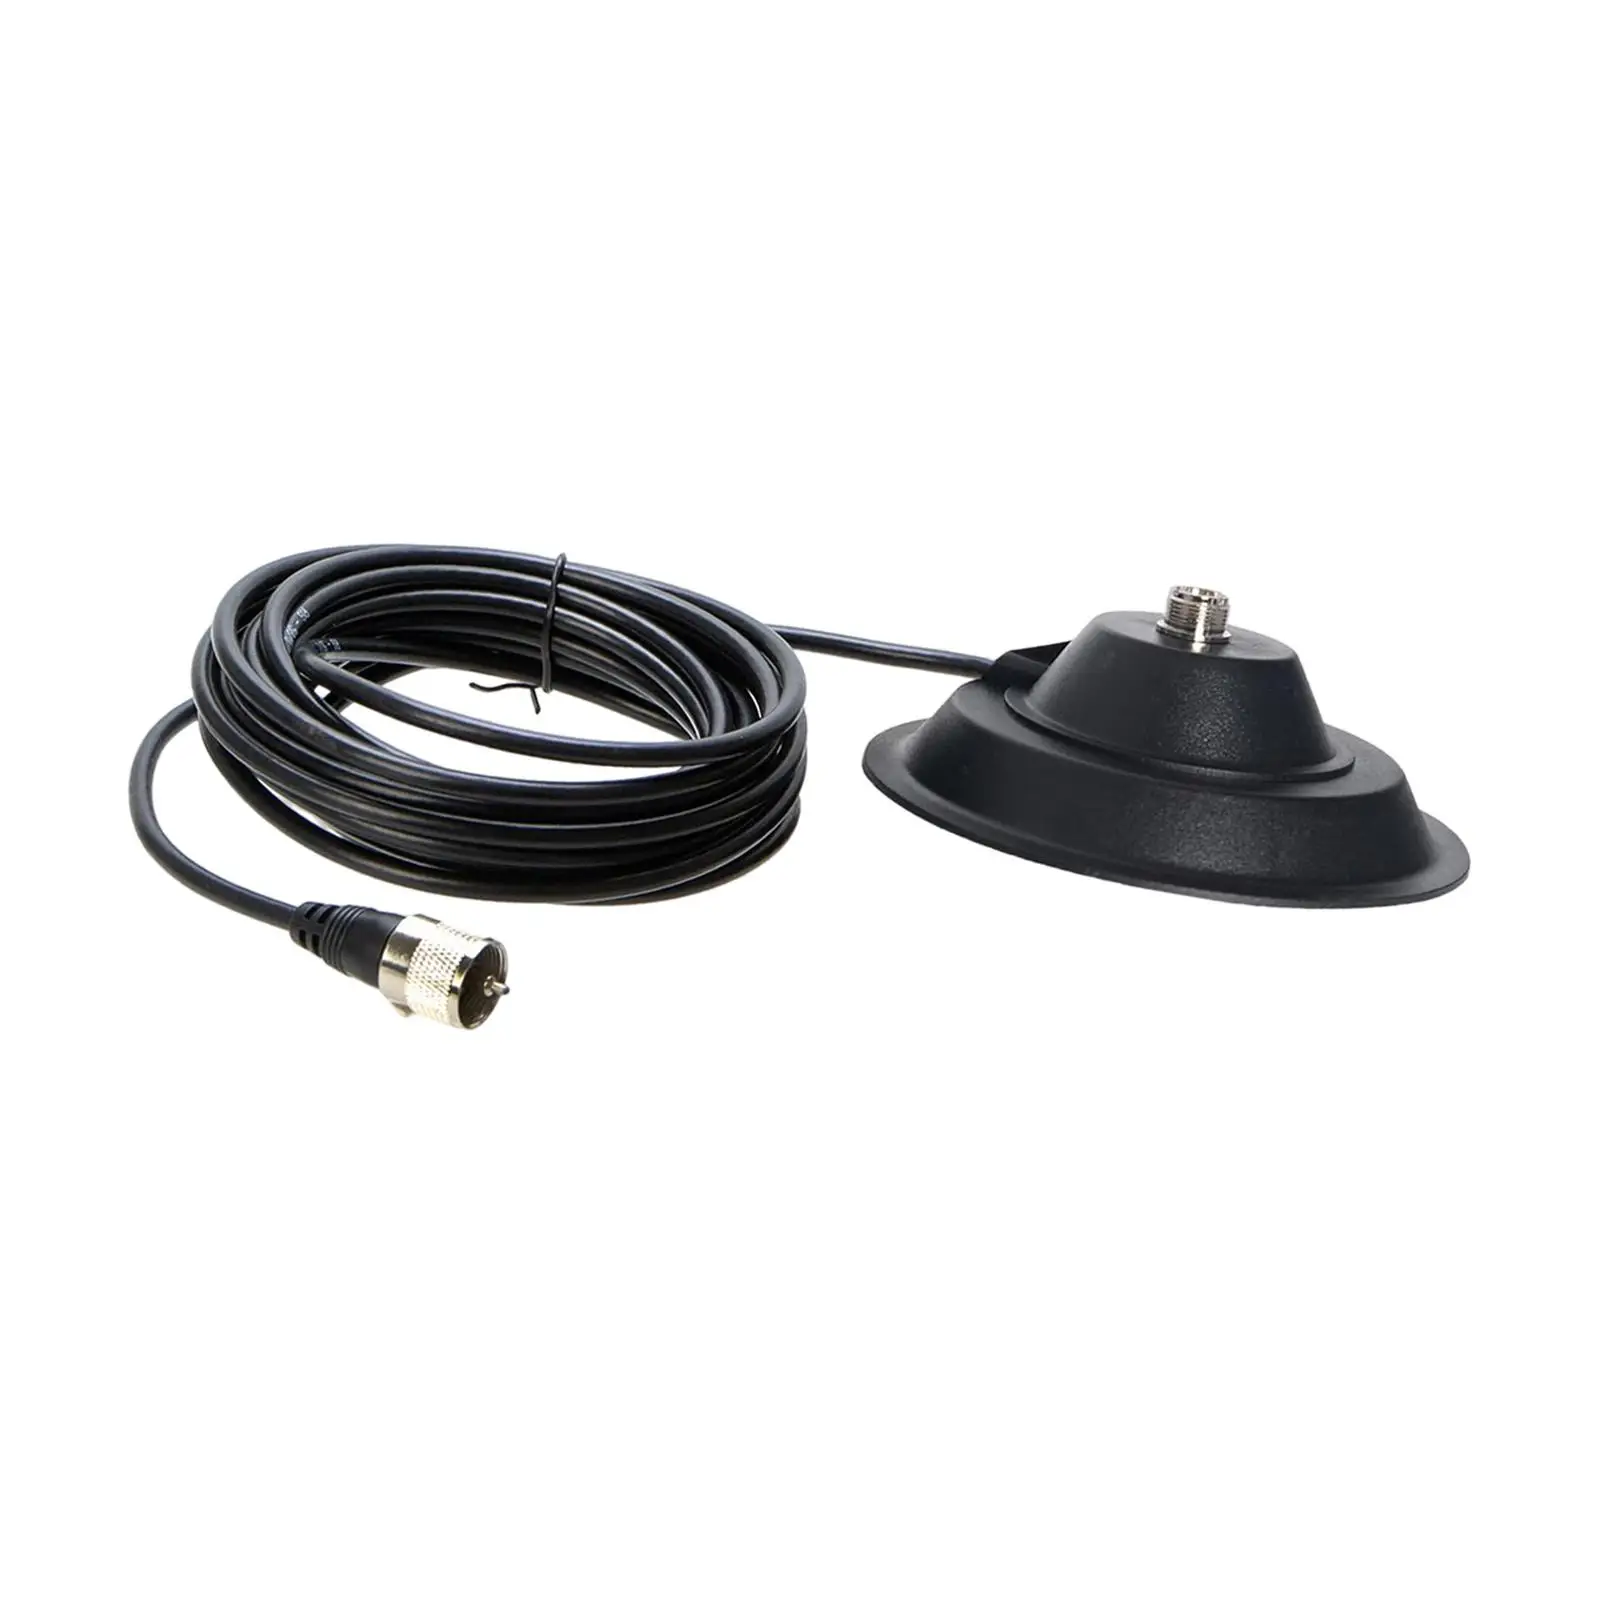 Mount Base PL-259 Plug Waterproof with 5M Extension Coaxial Cable for KT-7900D Bj-218 Car, Bus, Radio Antenna